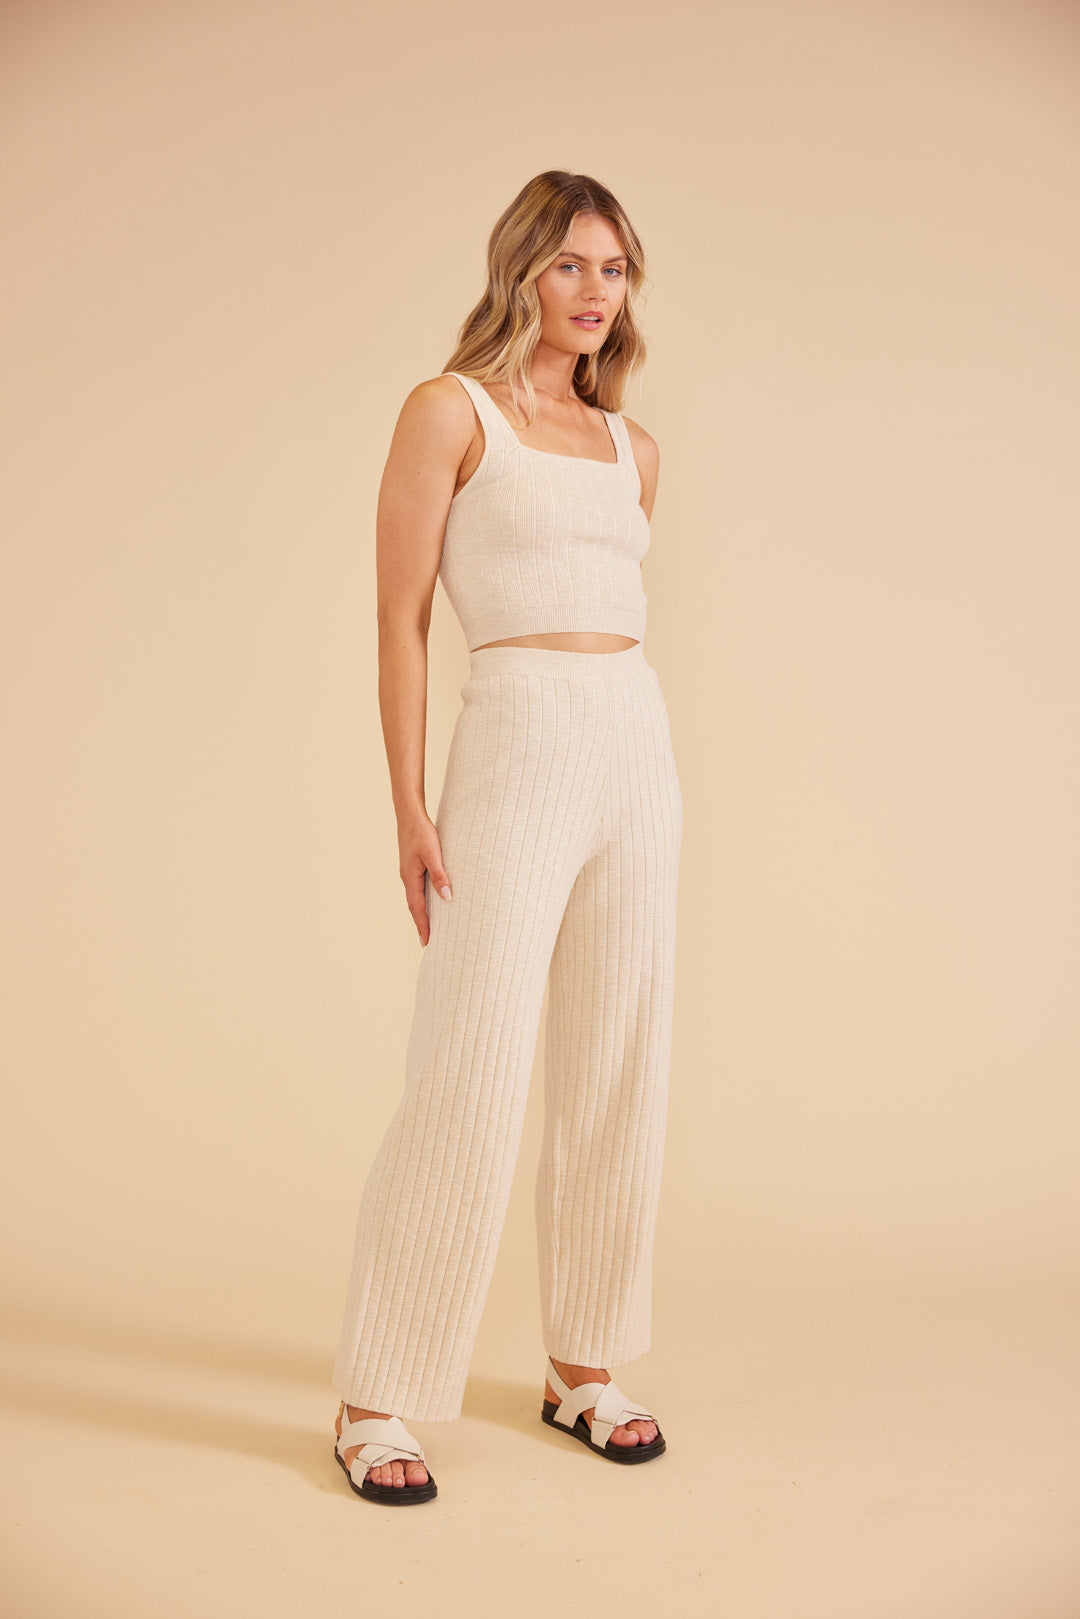 Model wearing Paige Knit Pants in cream from MinkPink available at UniKoncept in Waterloo